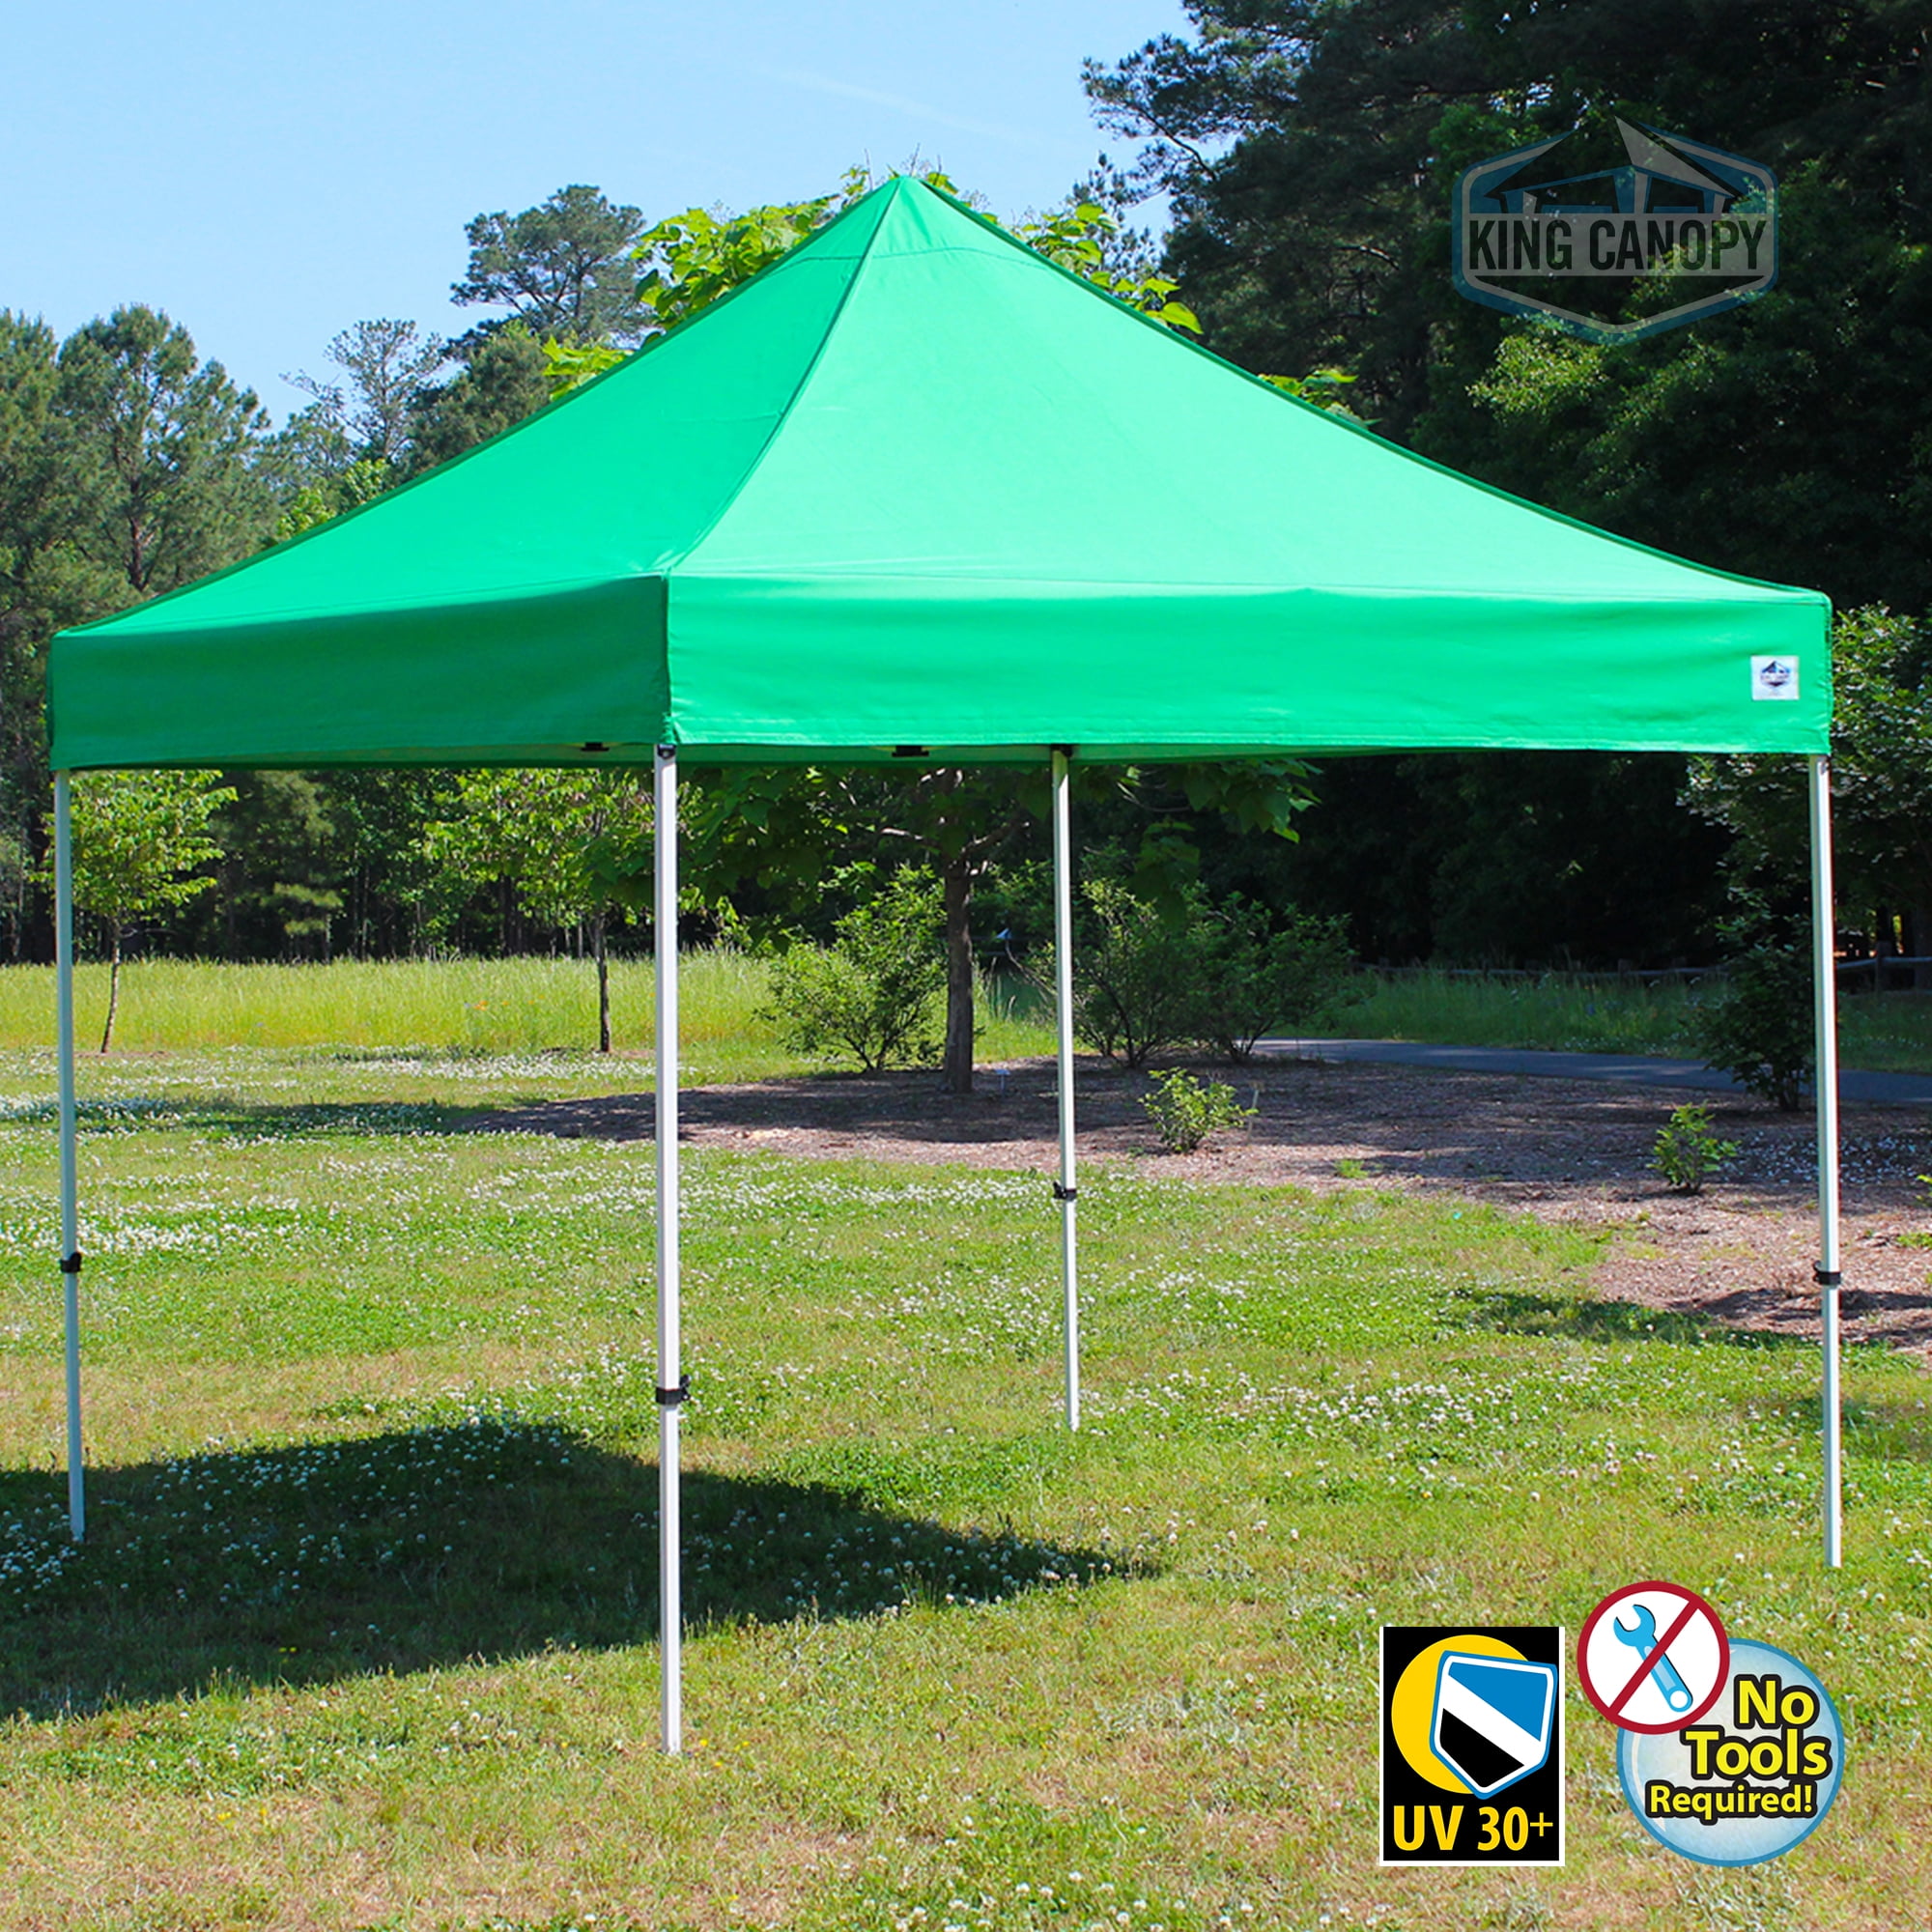 King Canopy FESTIVAL 10X10 Instant Pop Up Tent w/ GREEN ...